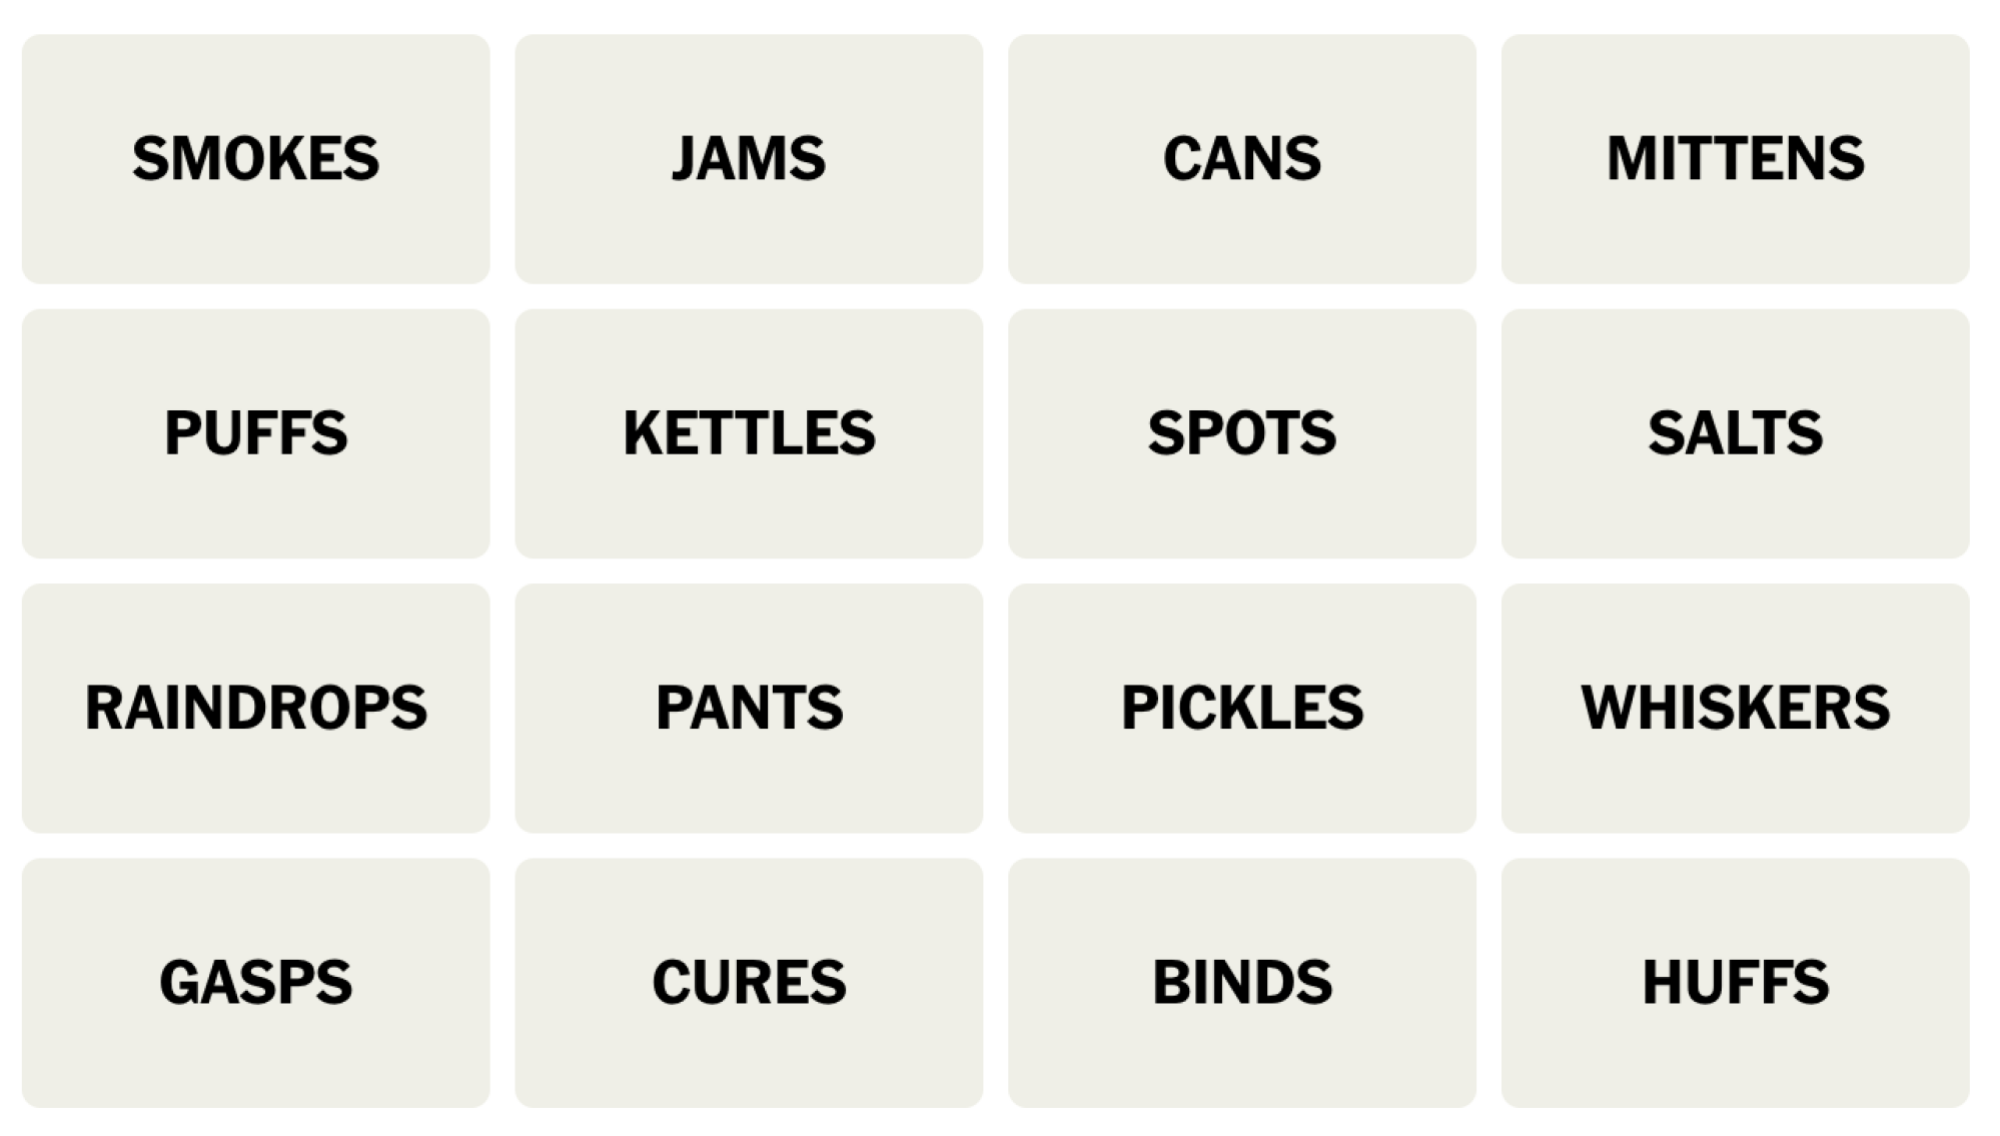 NYT Connections board for March 30, 2024: SMOKES, JAMS, CANS, MITTENS, PUFFS, KETTLES, SPOTS, SALTS, RAINDROPS, PANTS, PICKLES, WHISKERS, GASPS, CURES, BINDS, HUFFS.